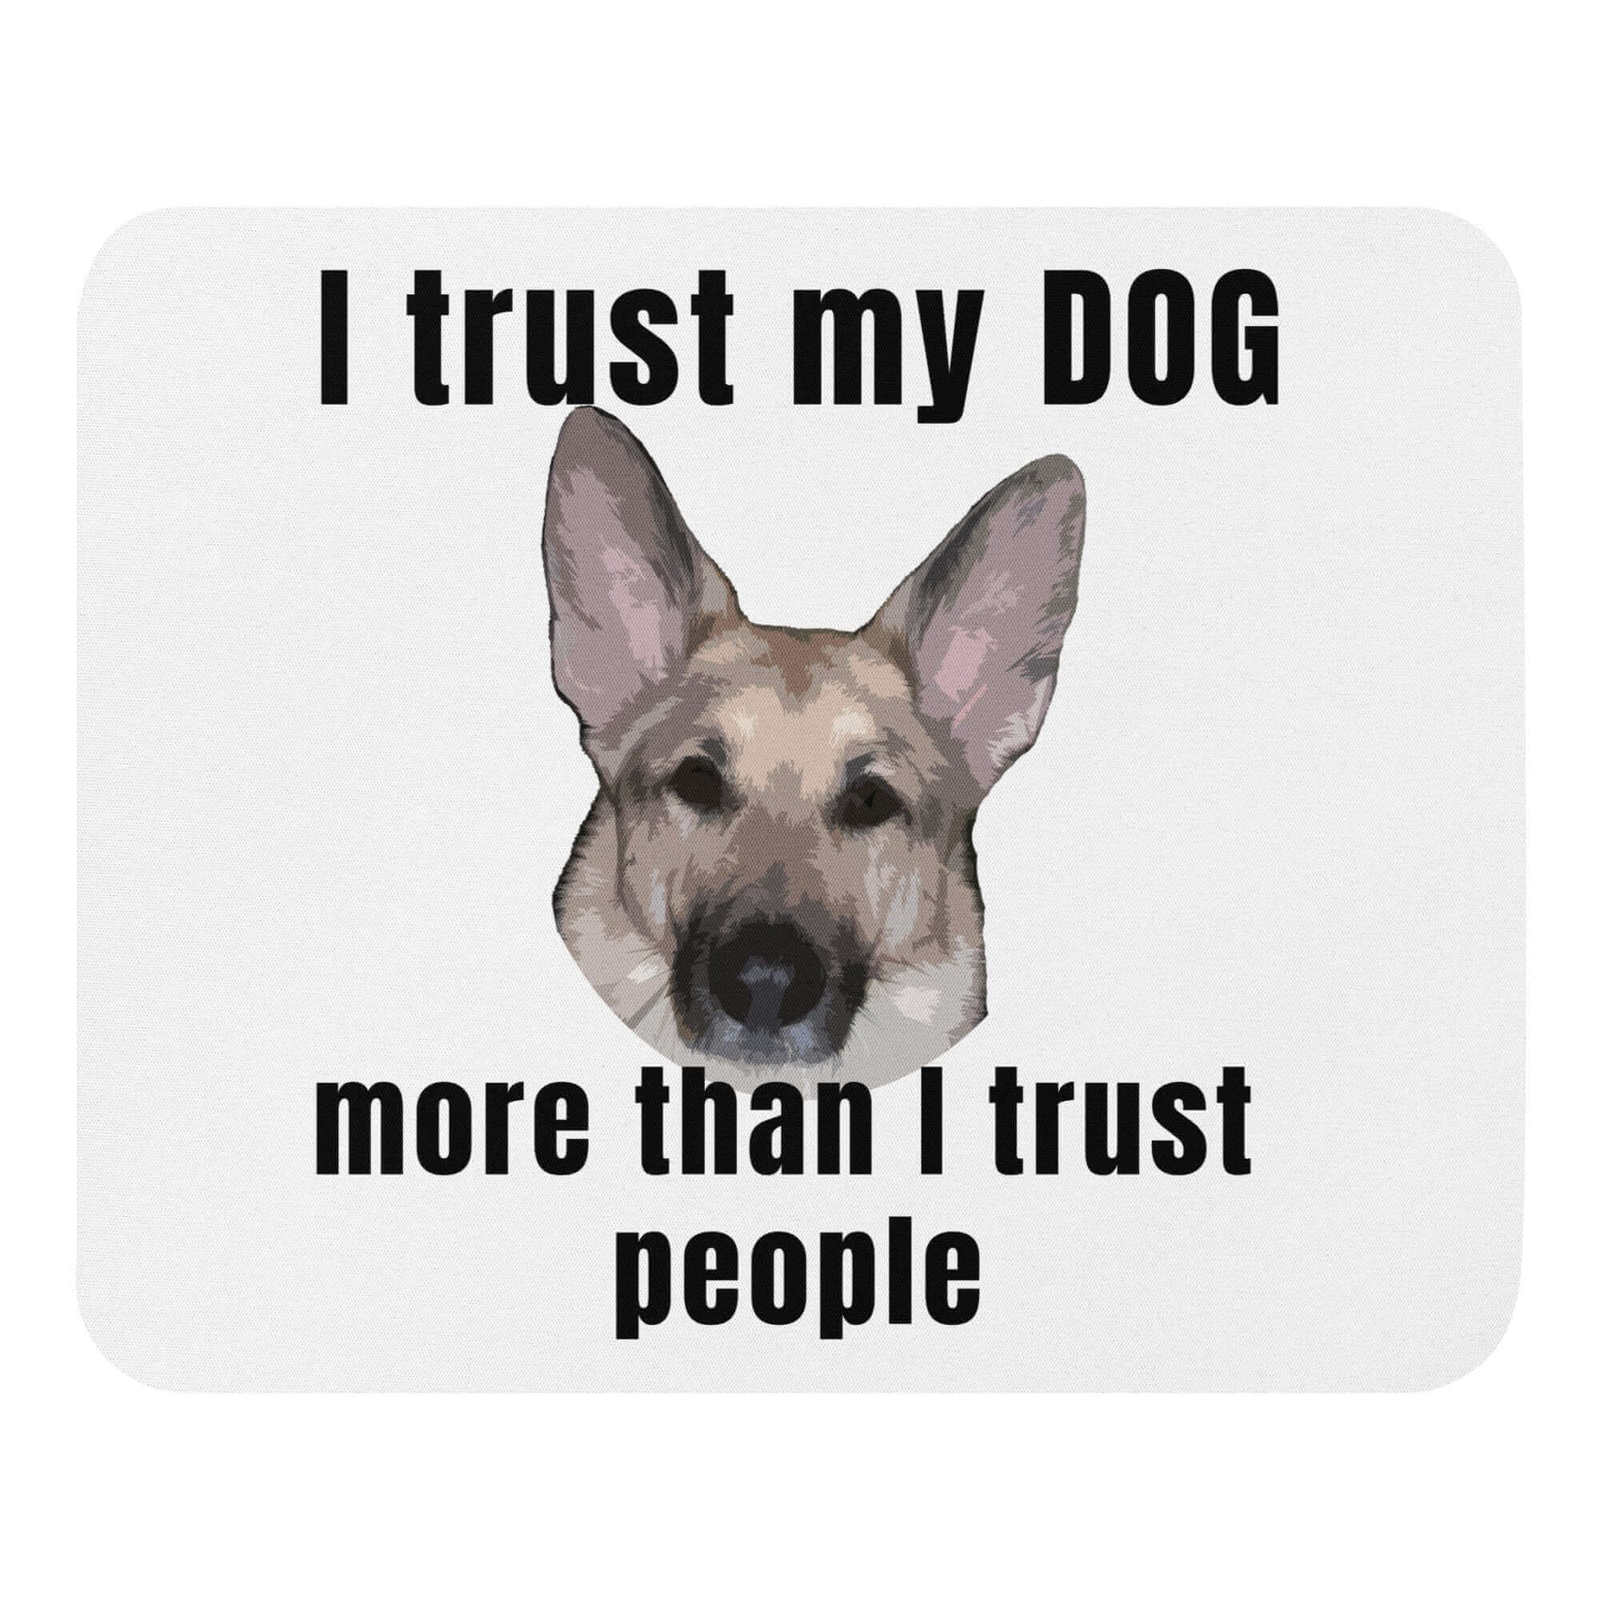 I trust my DOG more than I trust people - Mouse pad - $14.99